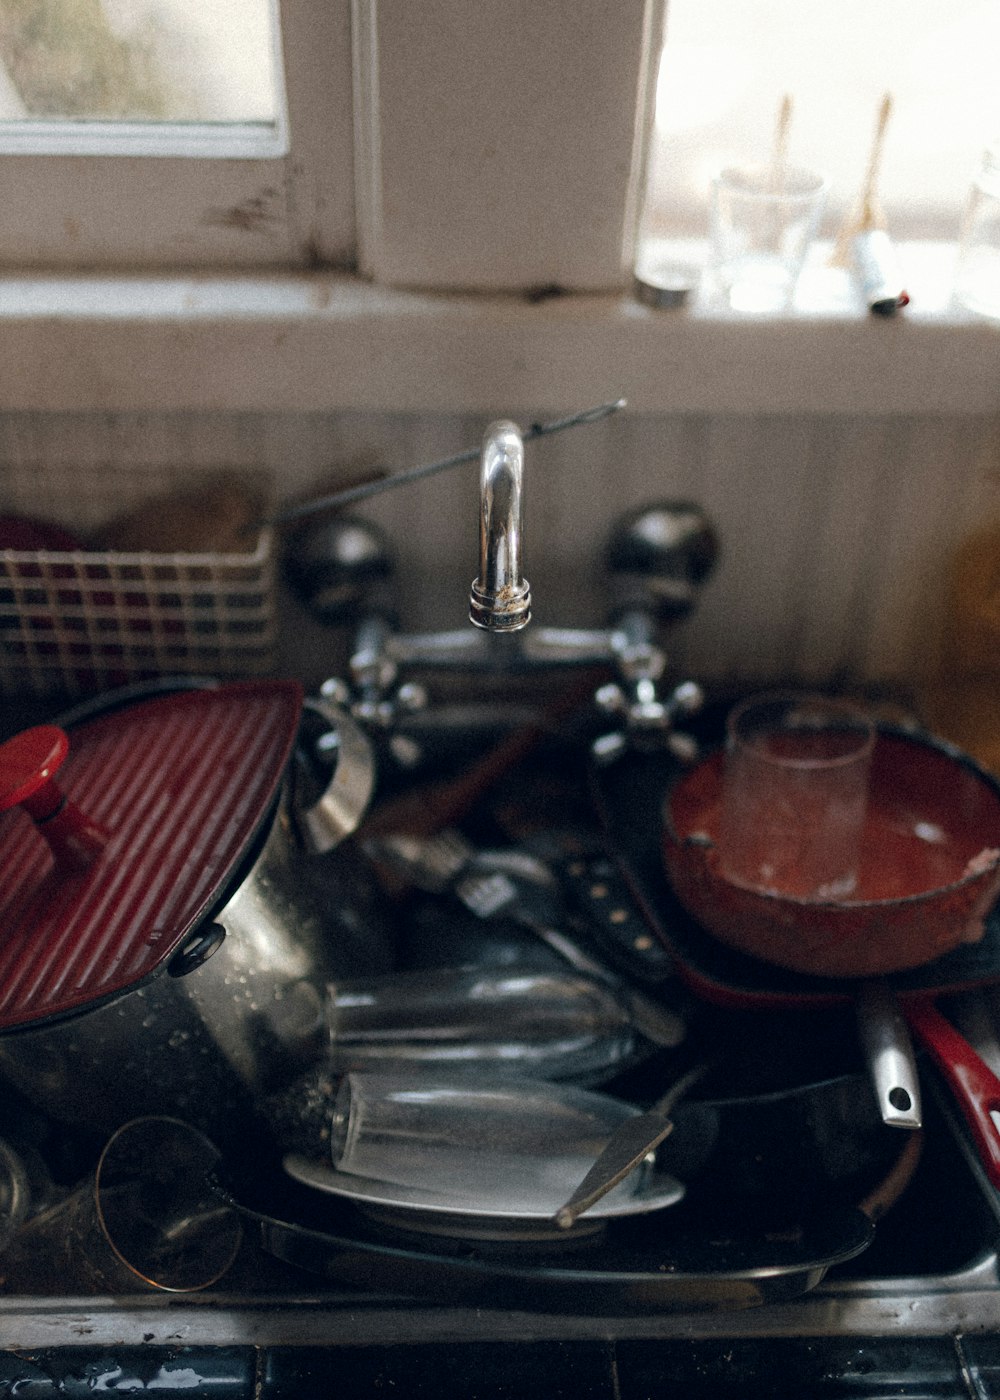 red and silver sink with faucet